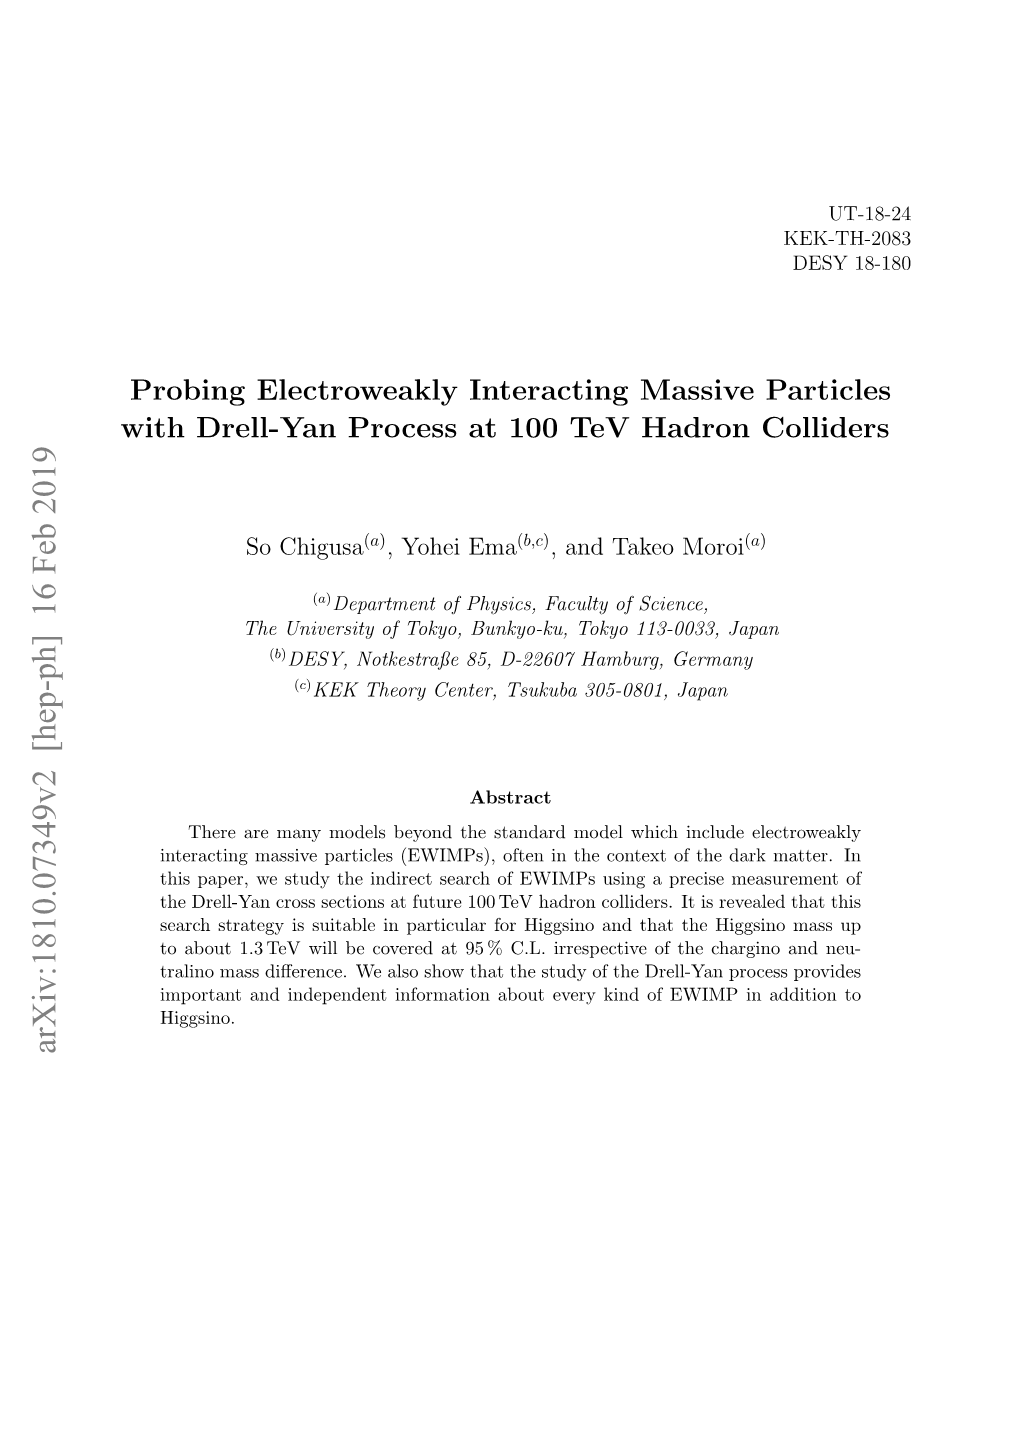 Probing Electroweakly Interacting Massive Particles with Drell-Yan Process at 100 Tev Hadron Colliders